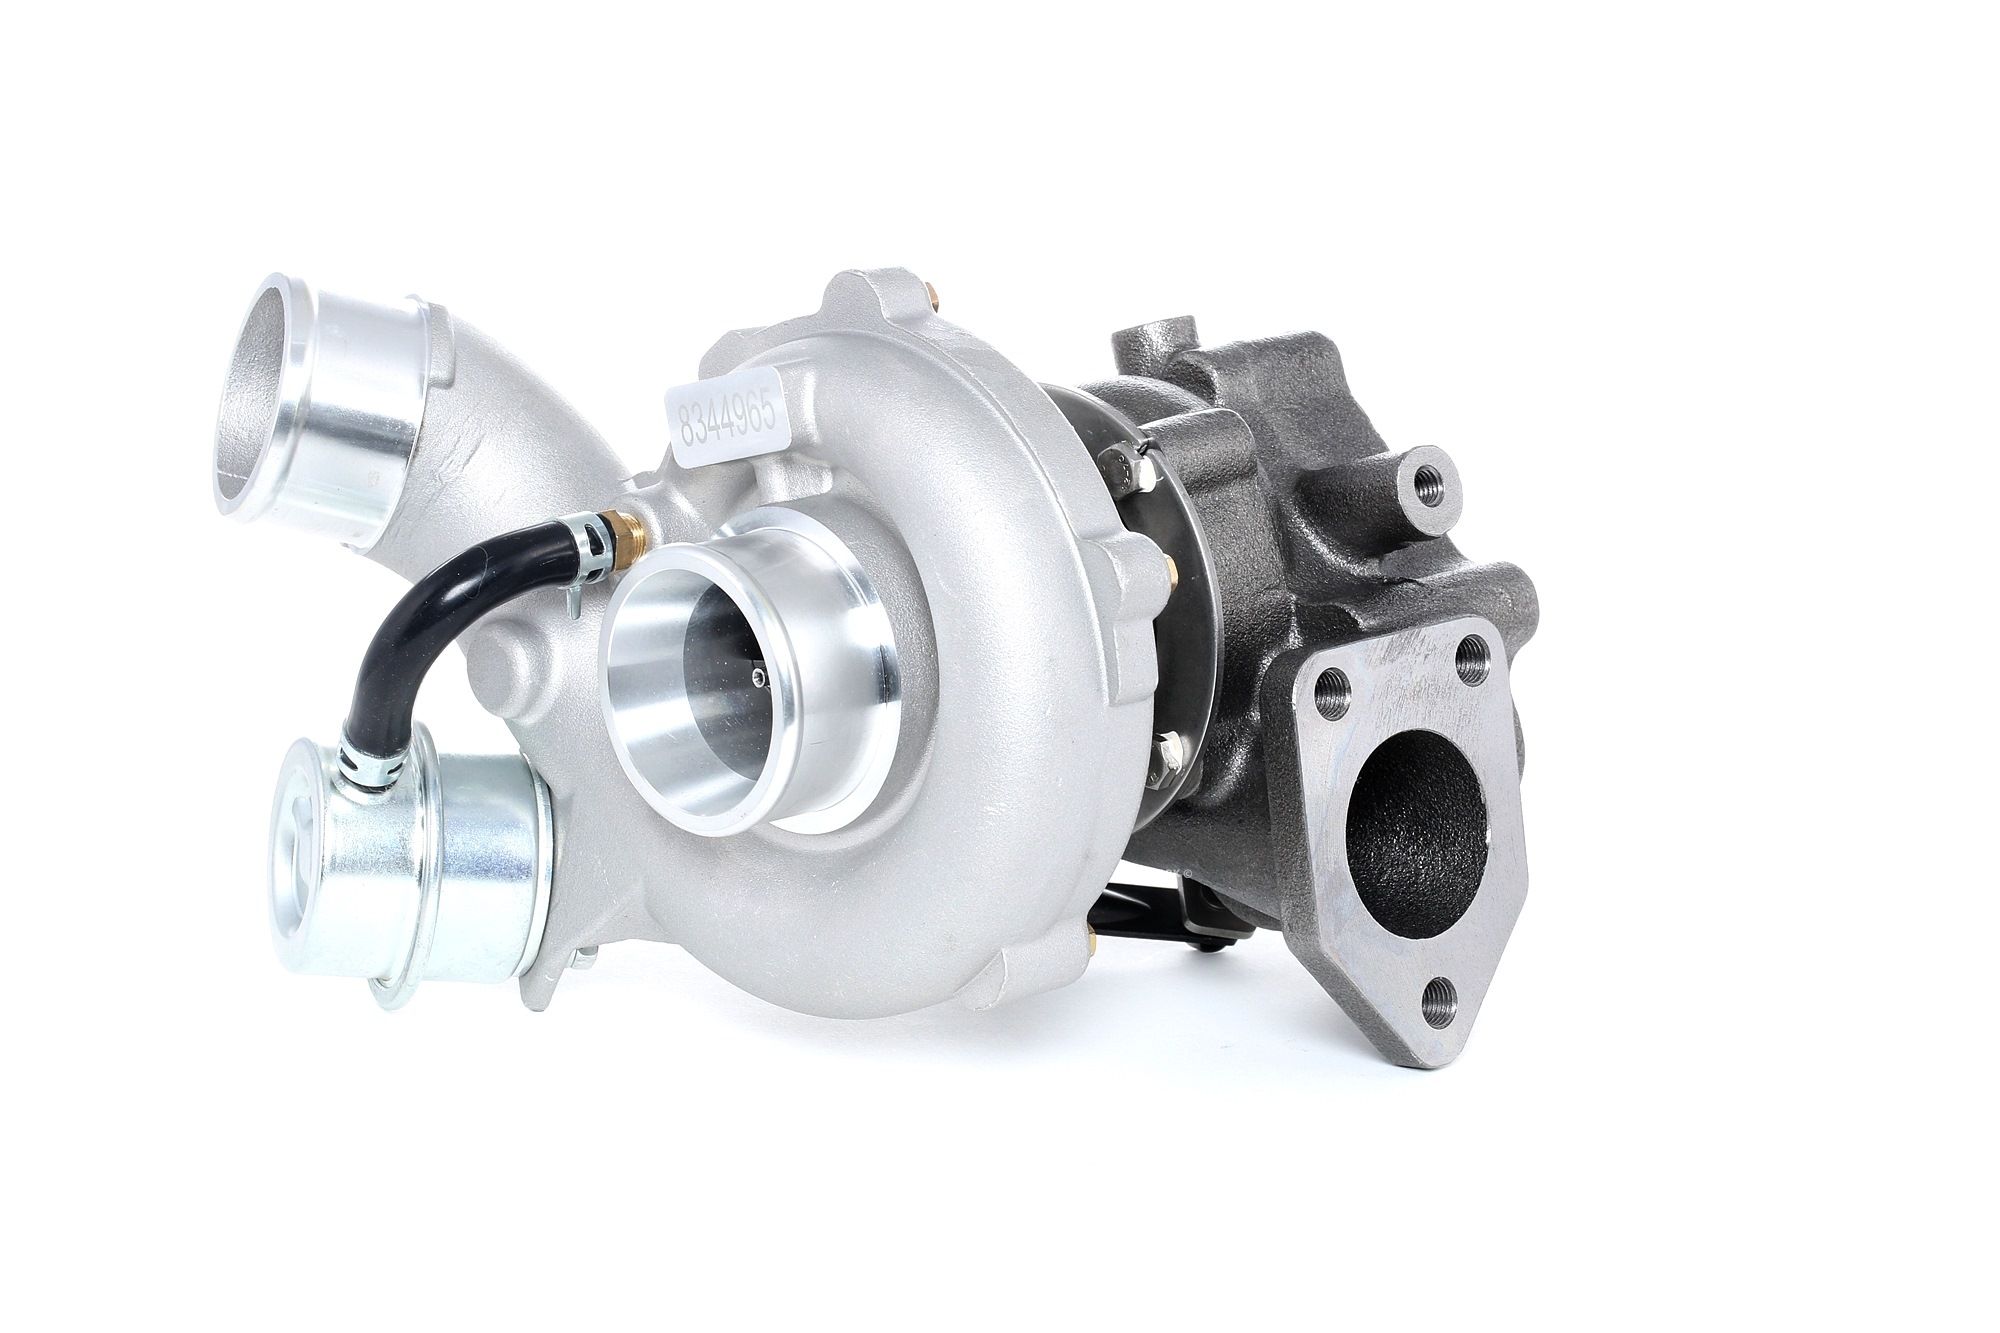 STARK SKCT-1190003 Turbocharger Exhaust Turbocharger, Diesel, Euro 4 (D4), Vacuum-controlled, without gaskets/seals